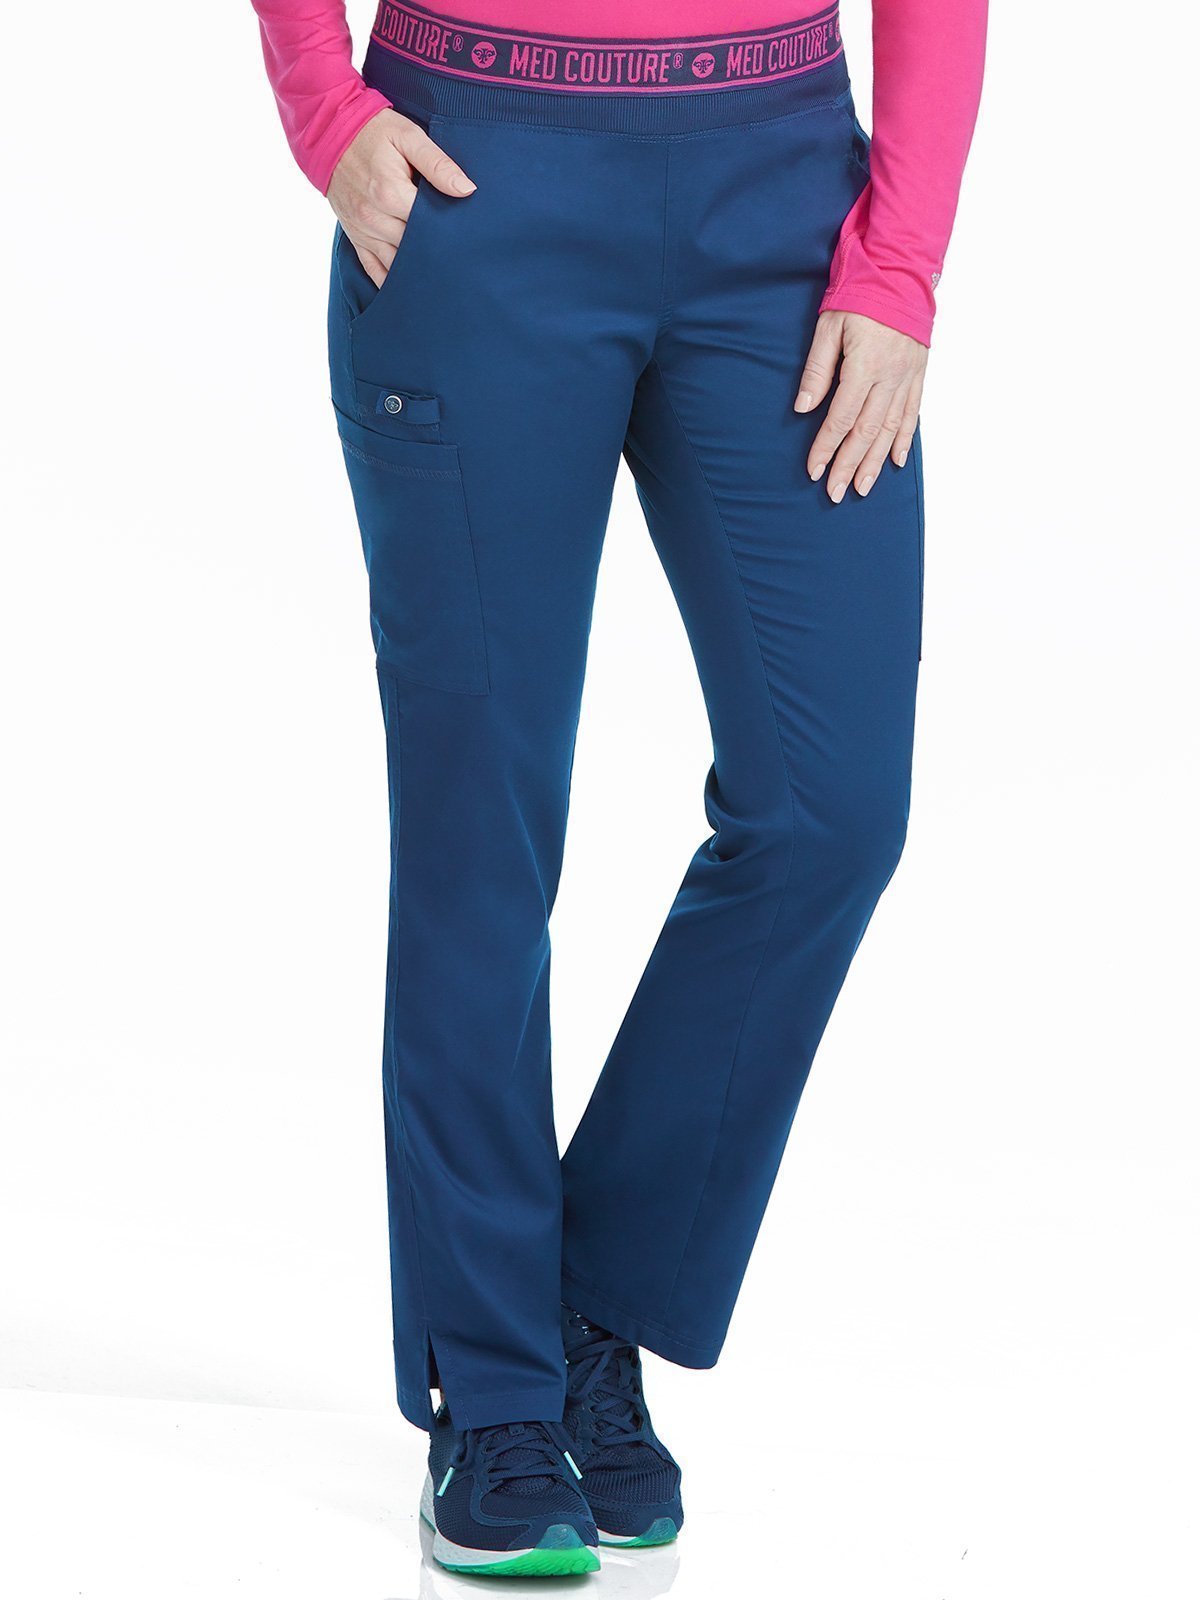 Med Couture 7739 YOGA 2 CARGO POCKET PANT (Size: XS/T-XL/T)